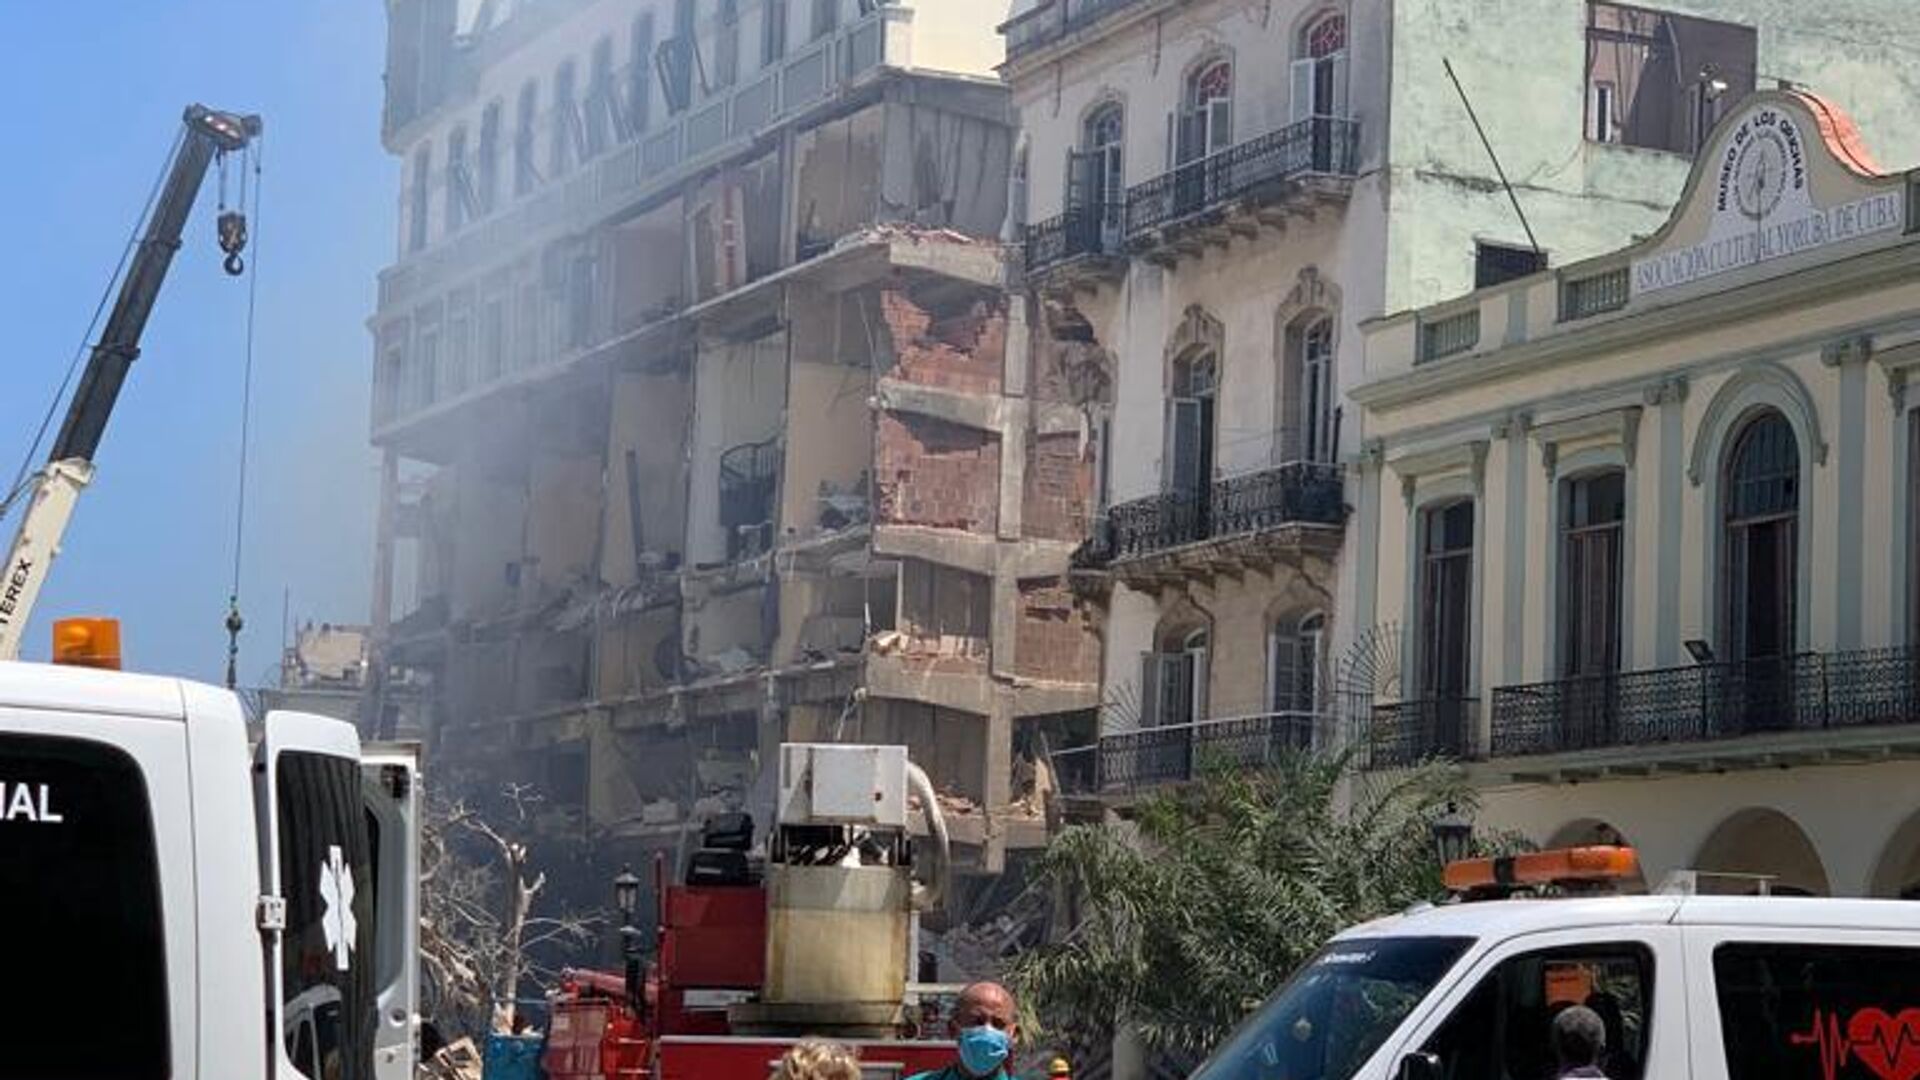 Rescuers work after an explosion in the Saratoga Hotel in Havana, on May 6, 2022. - A powerful explosion Friday destroyed part of a hotel under repair in central Havana, AFP witnessed, with no casualties immediately reported. (Photo by ADALBERTO ROQUE / AFP) - Sputnik International, 1920, 06.05.2022